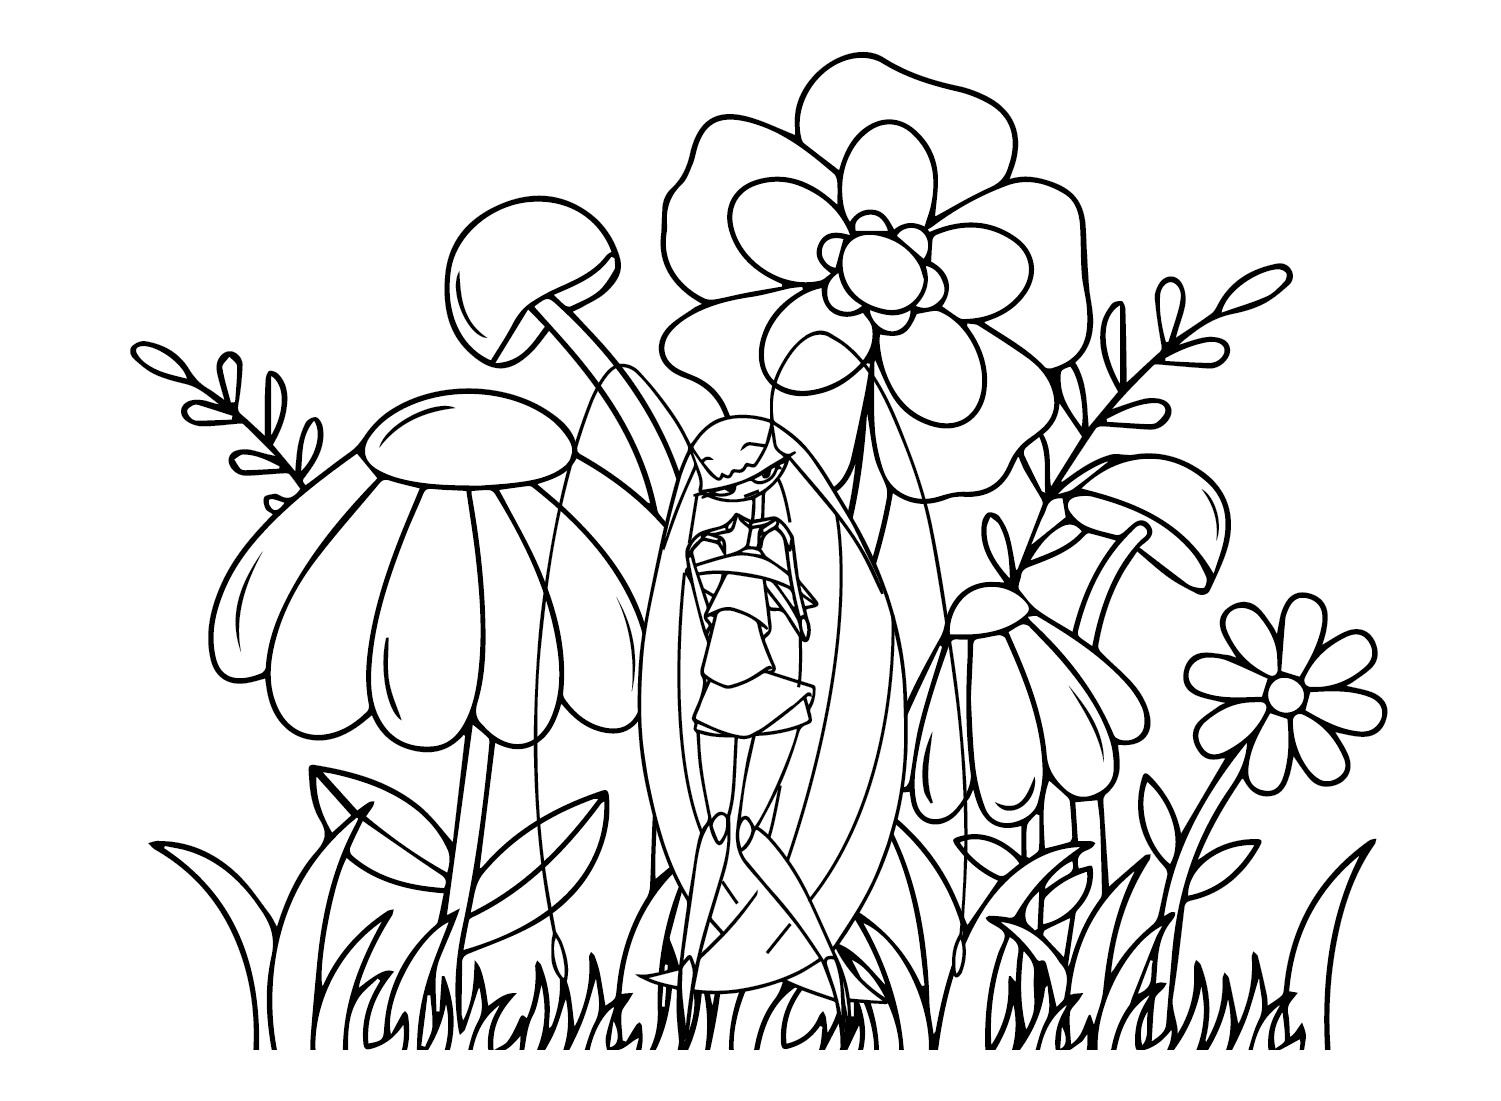 Flower and Pheromosa Coloring Page